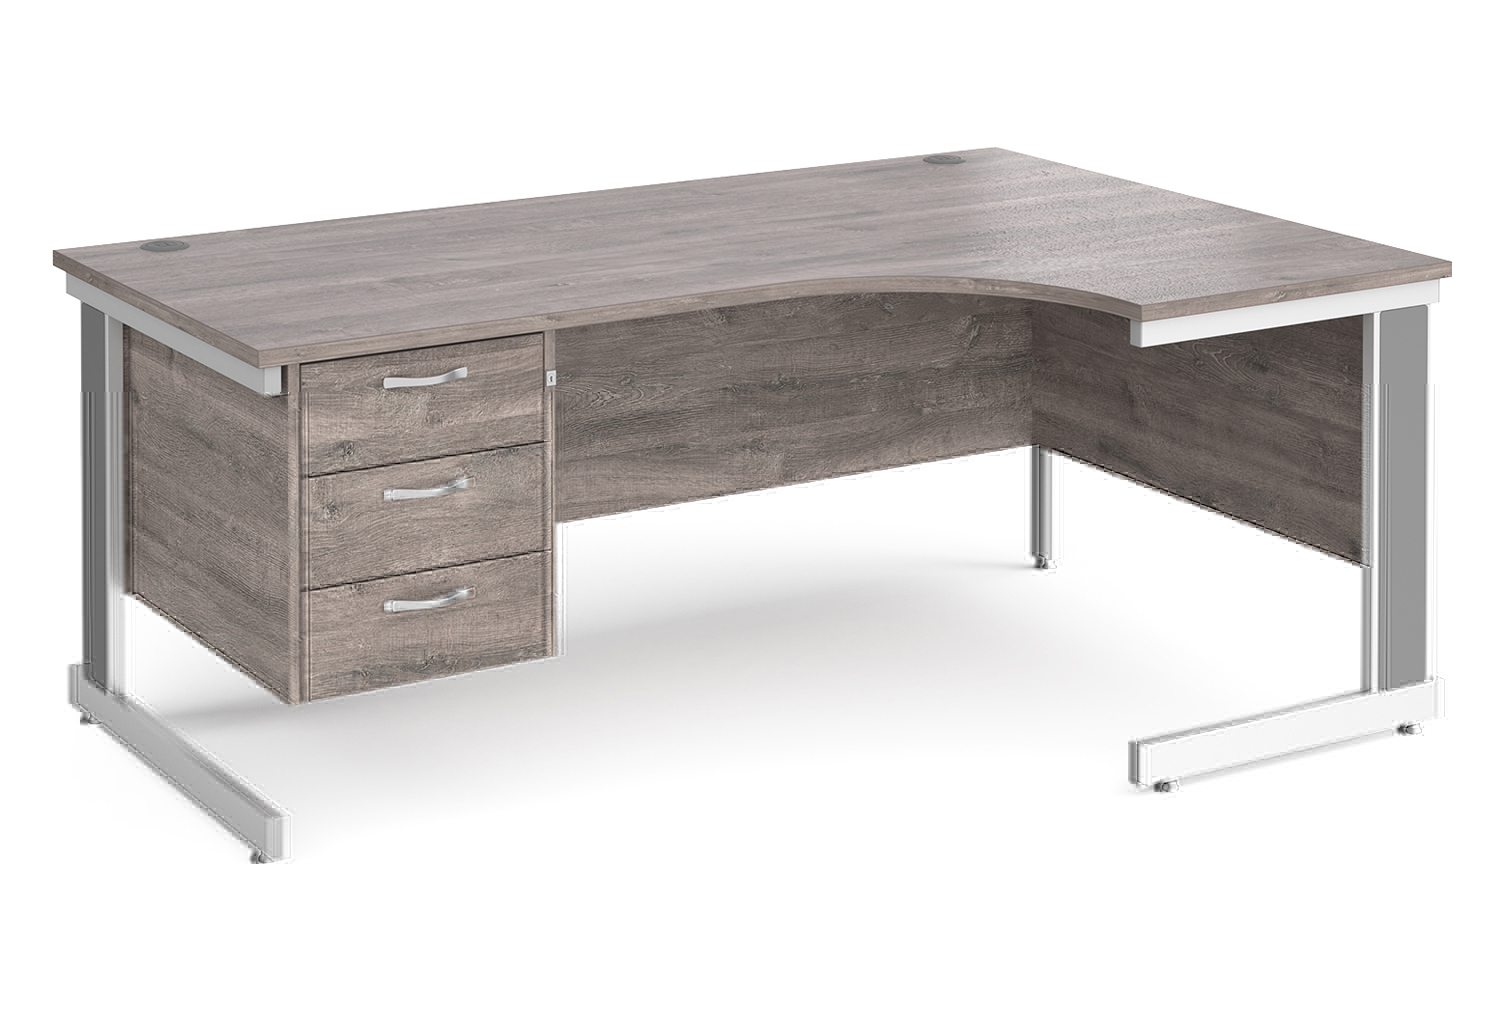 All Grey Oak Deluxe Right Hand Ergo Office Desk 3 Drawers, 180wx120/80dx73h (cm), Express Delivery